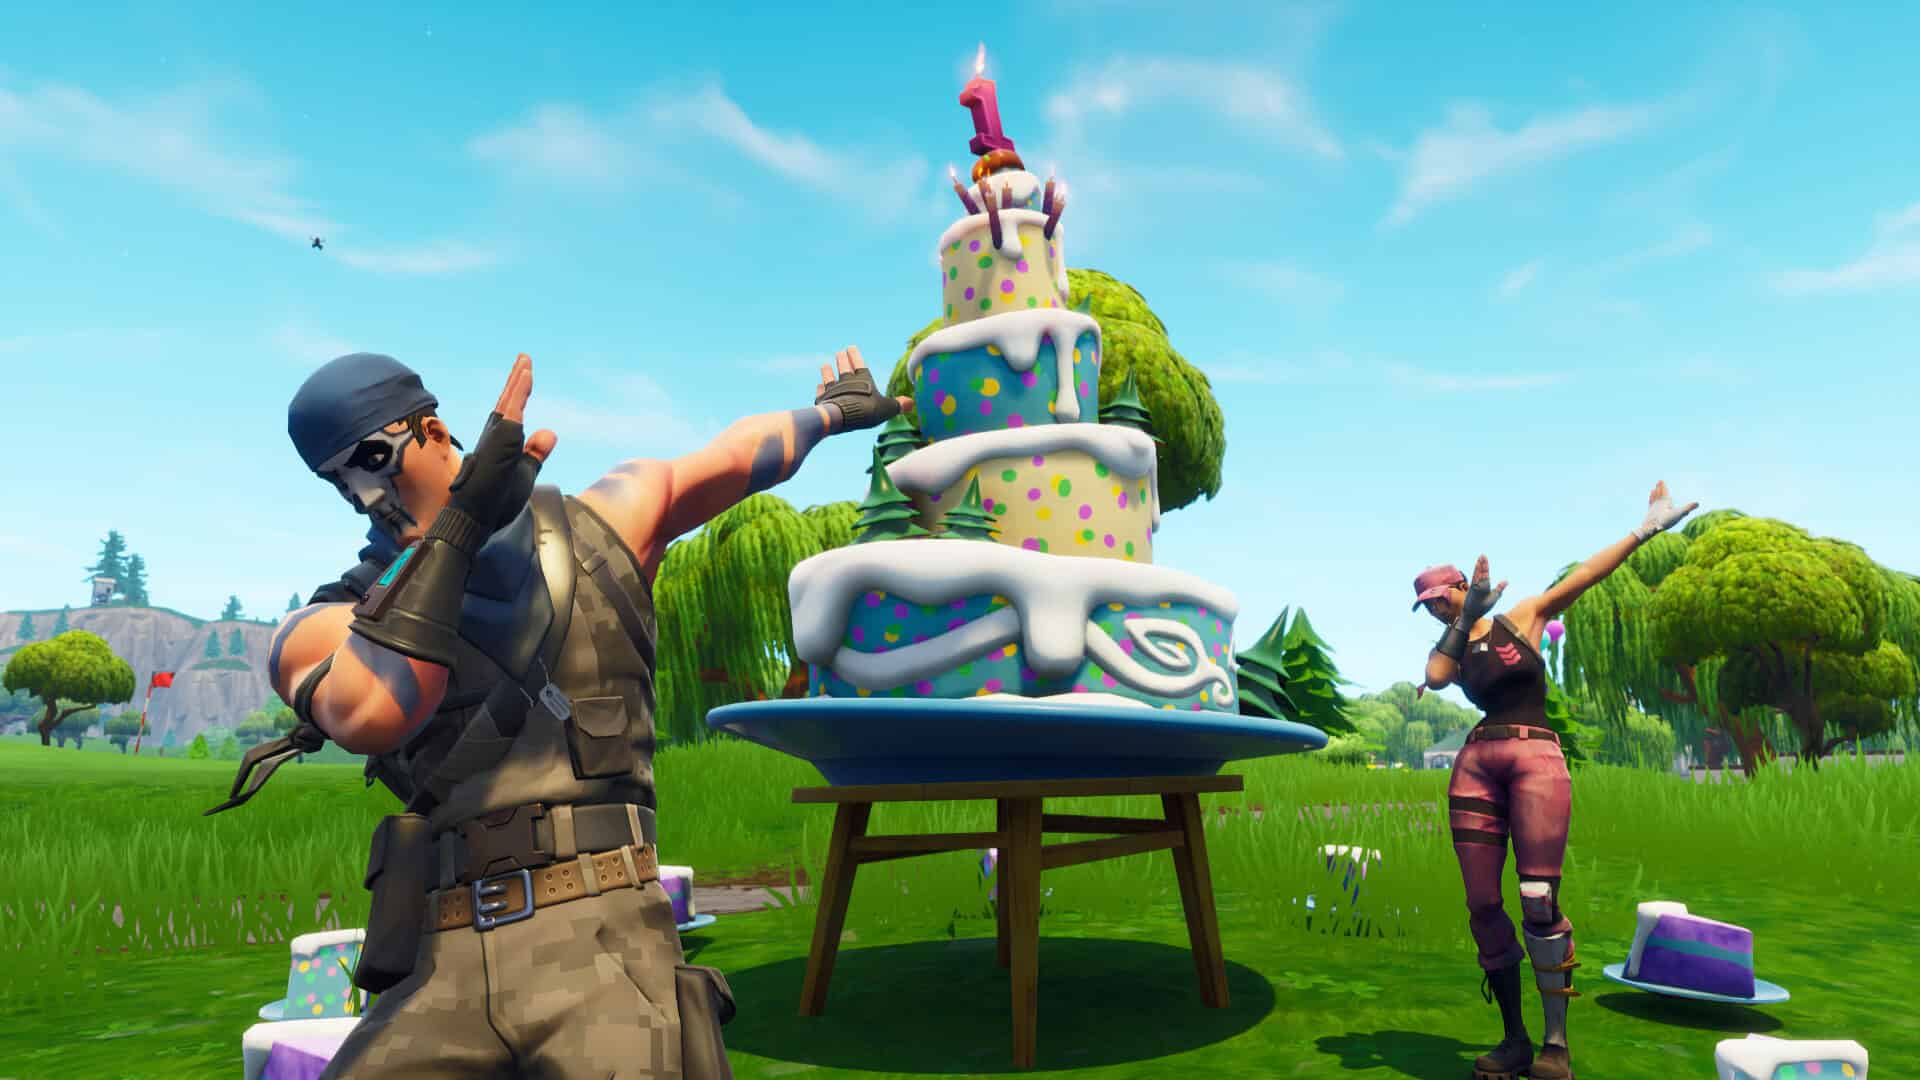 Happy Birthday Fortnite Images Wallpapers